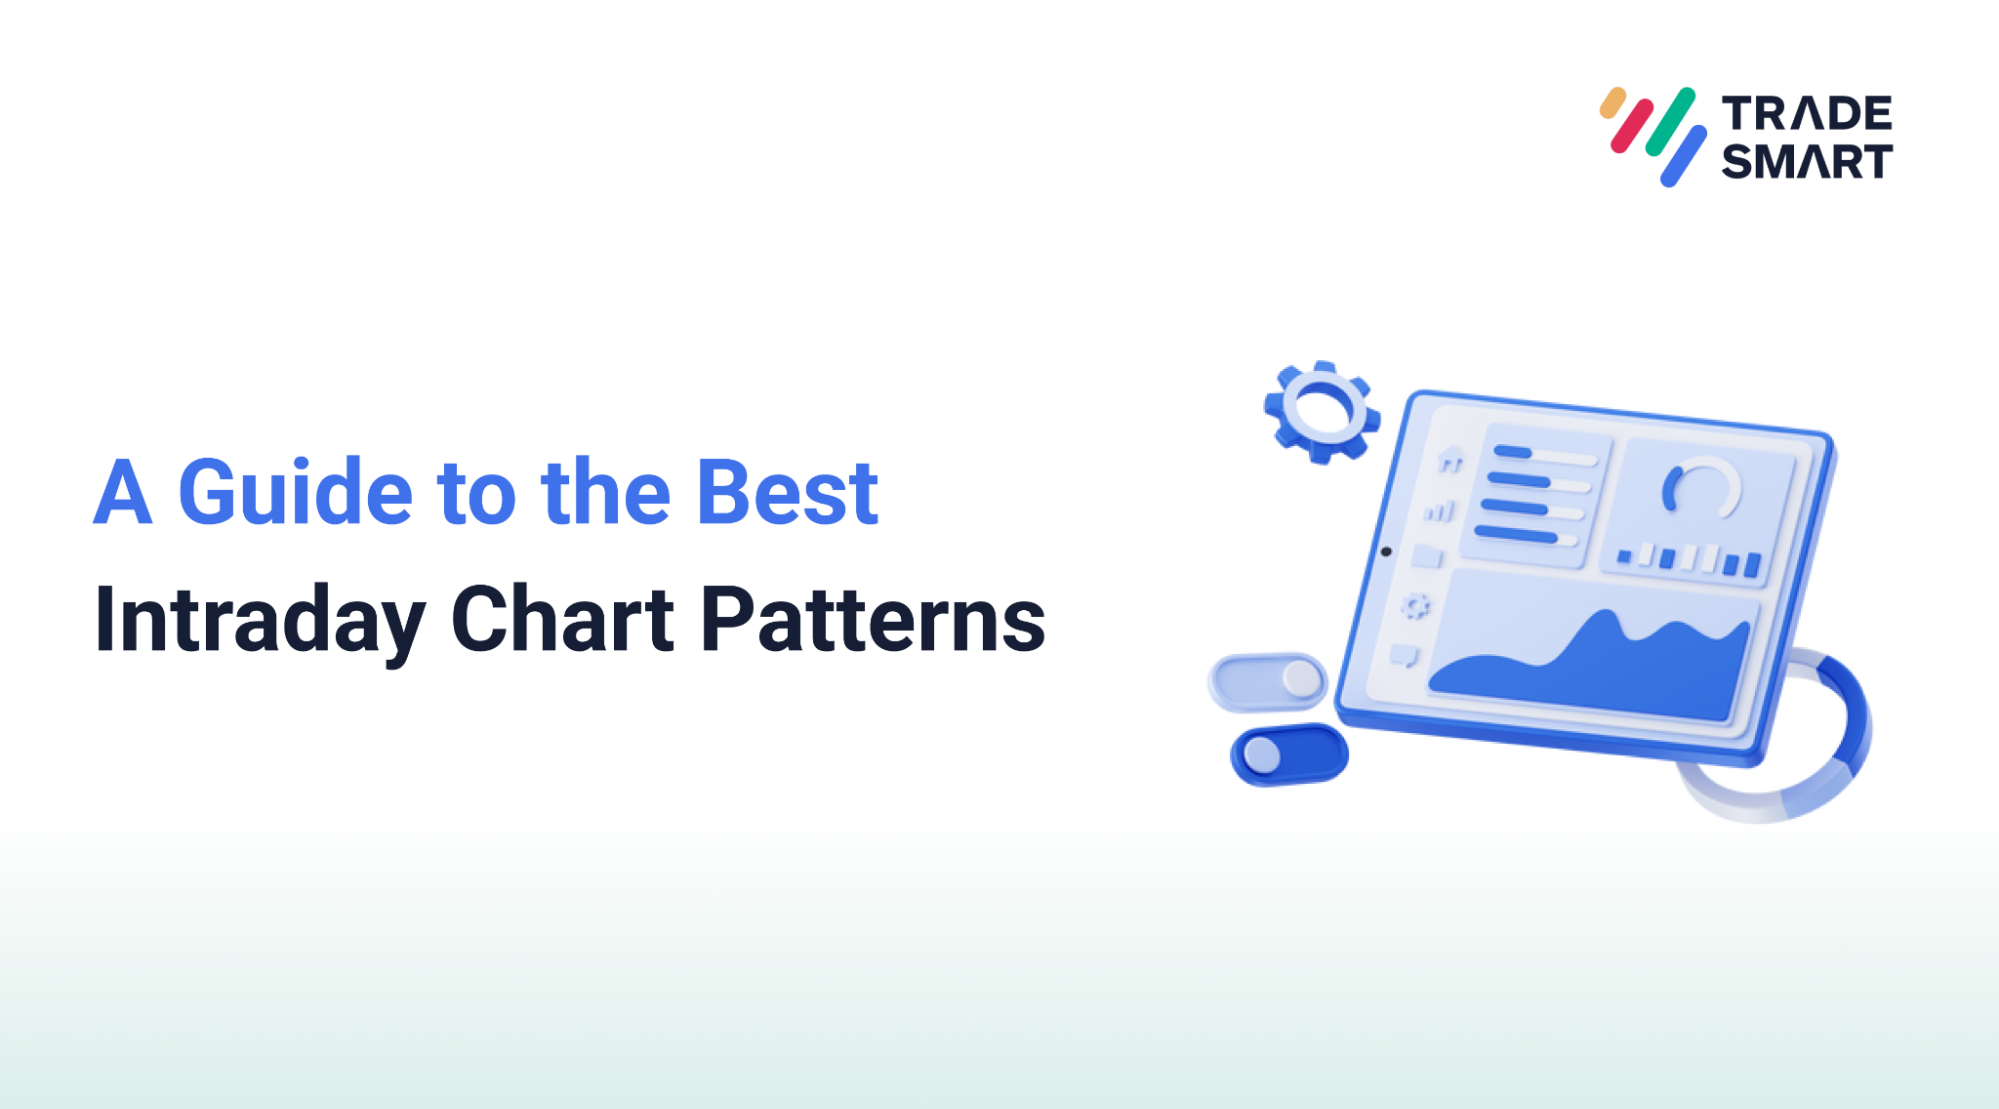 A Guide to the Best Intraday Chart Patterns